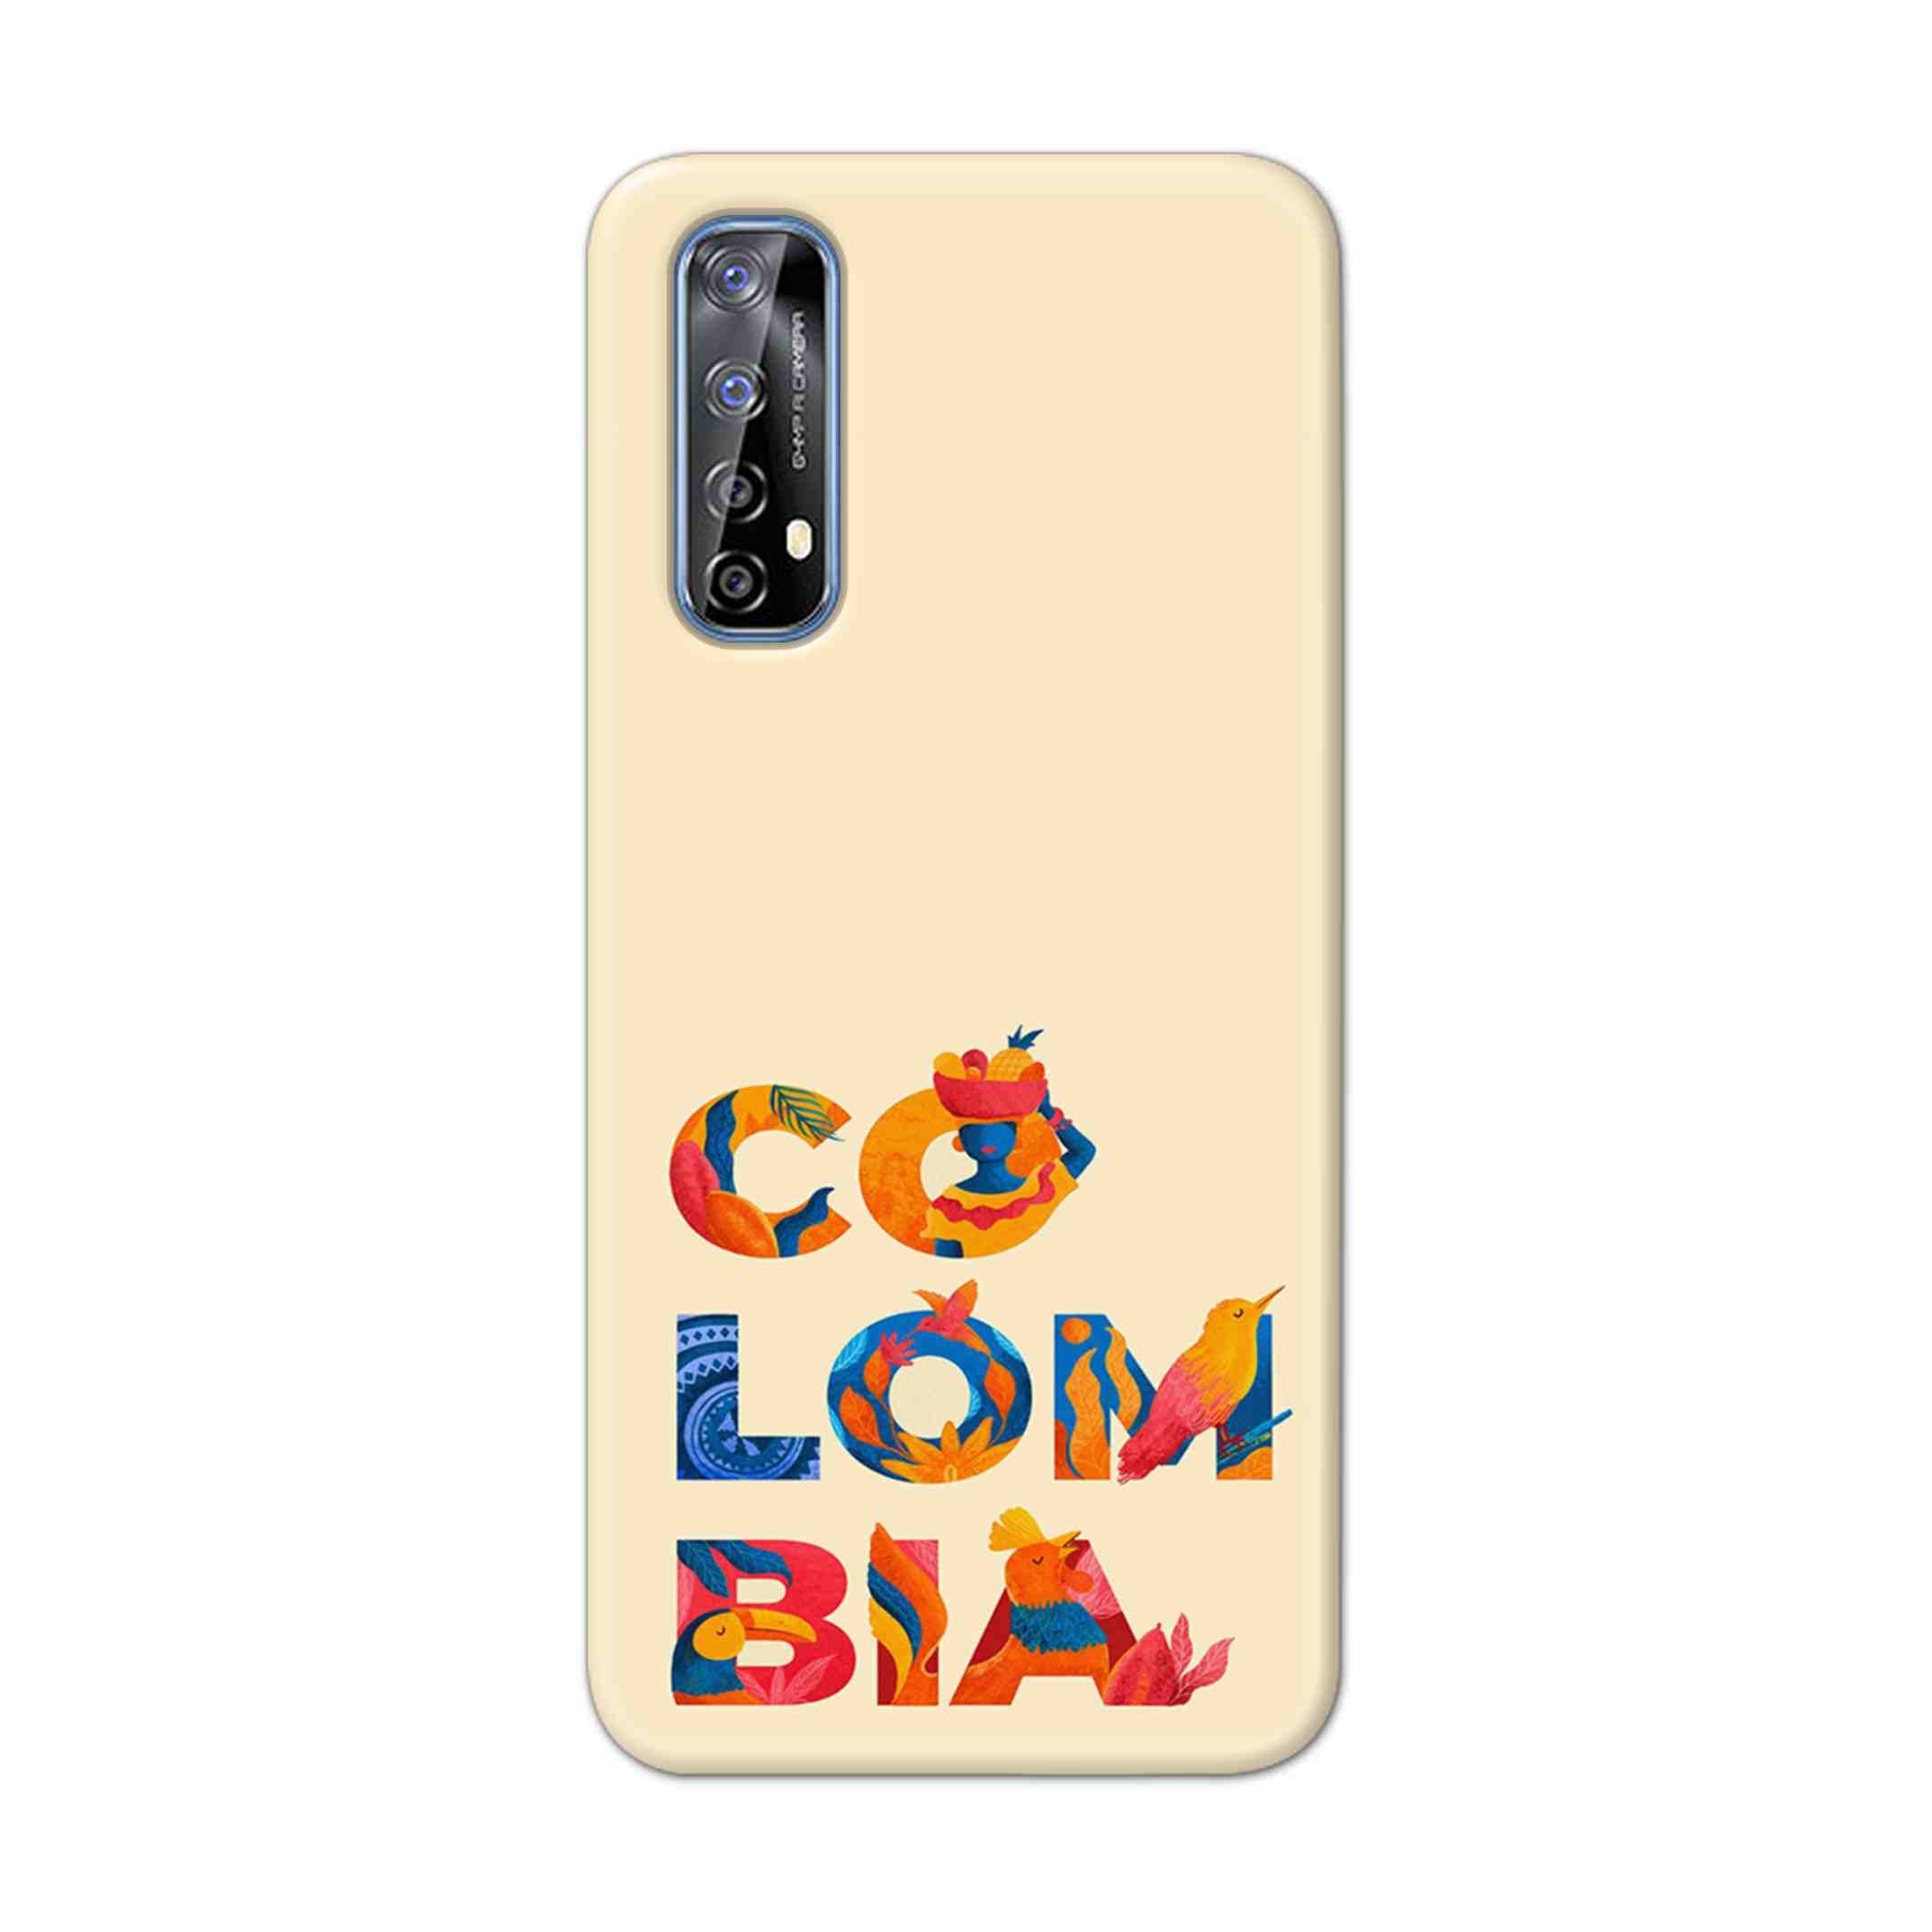 Buy Colombia Hard Back Mobile Phone Case Cover For Realme 7 Online